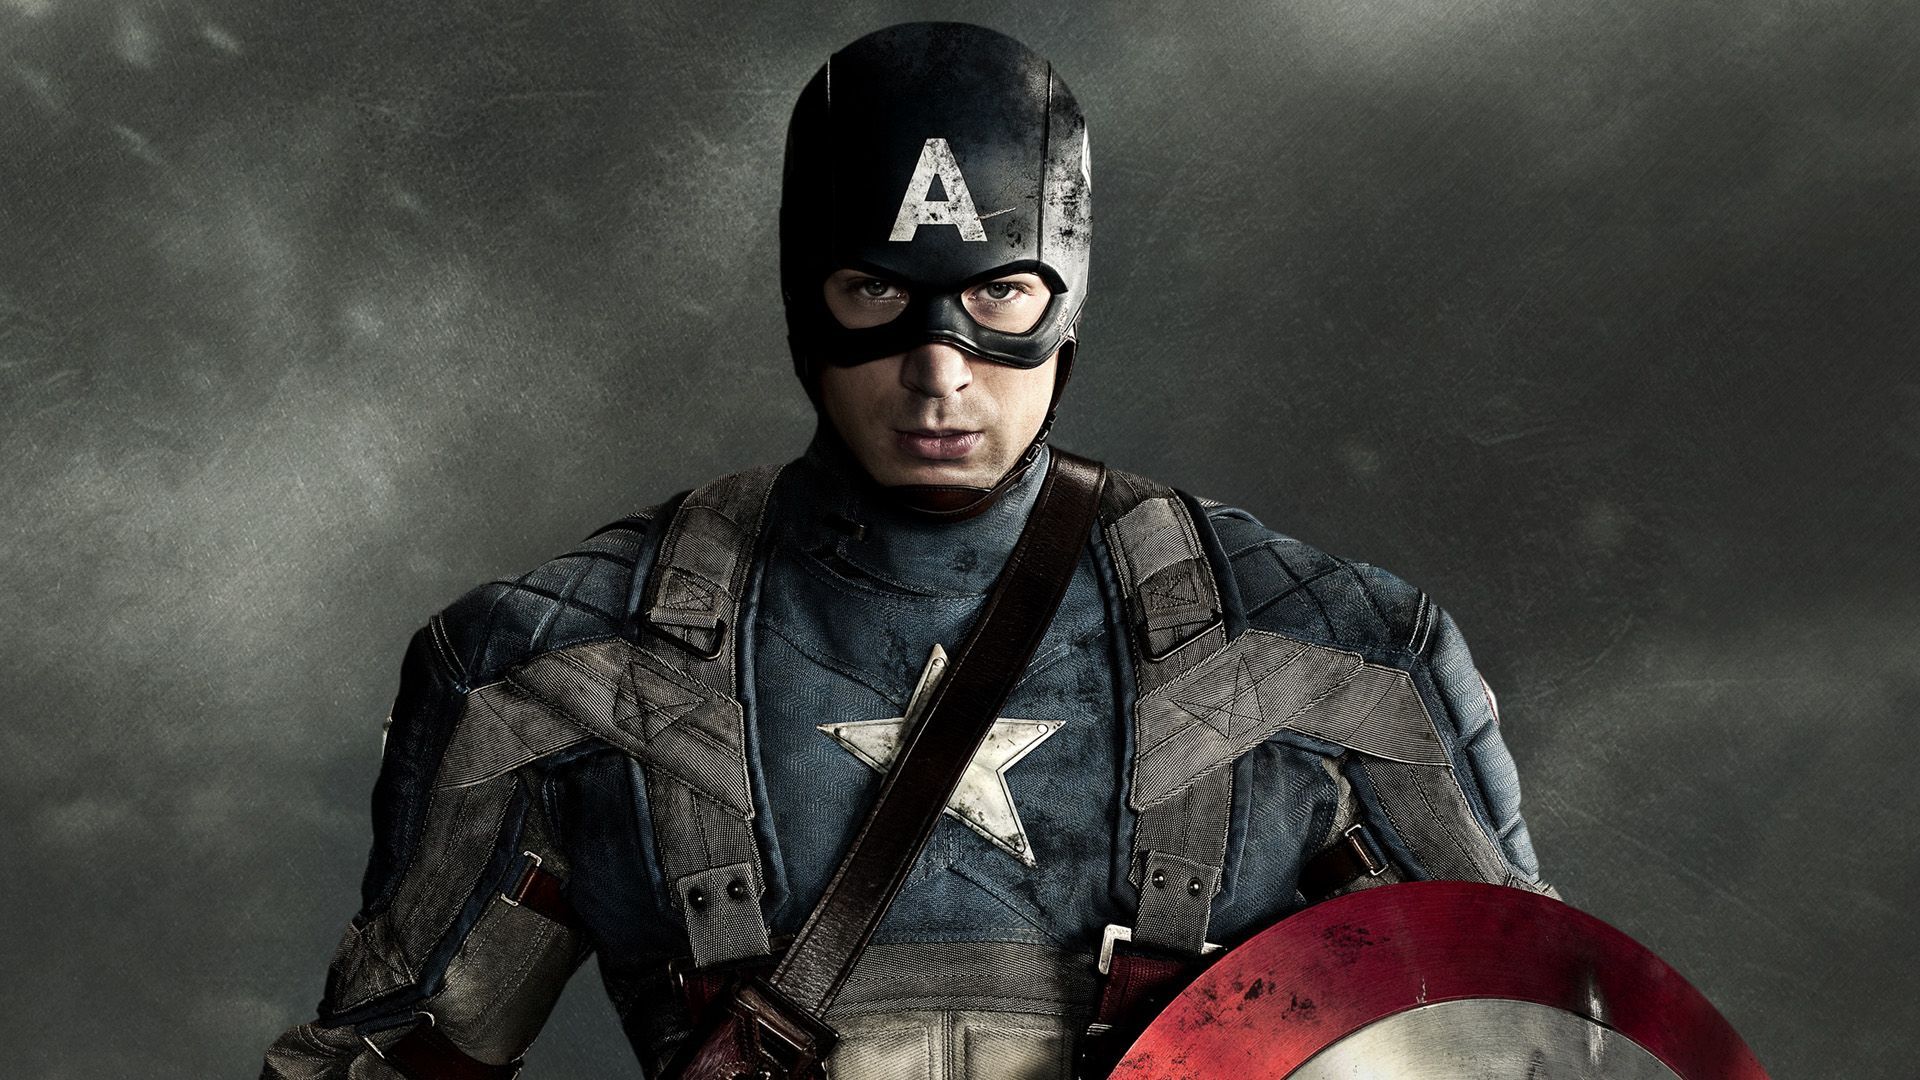 Download Captain America Winter Soldier Wallpaper Images #xl9my